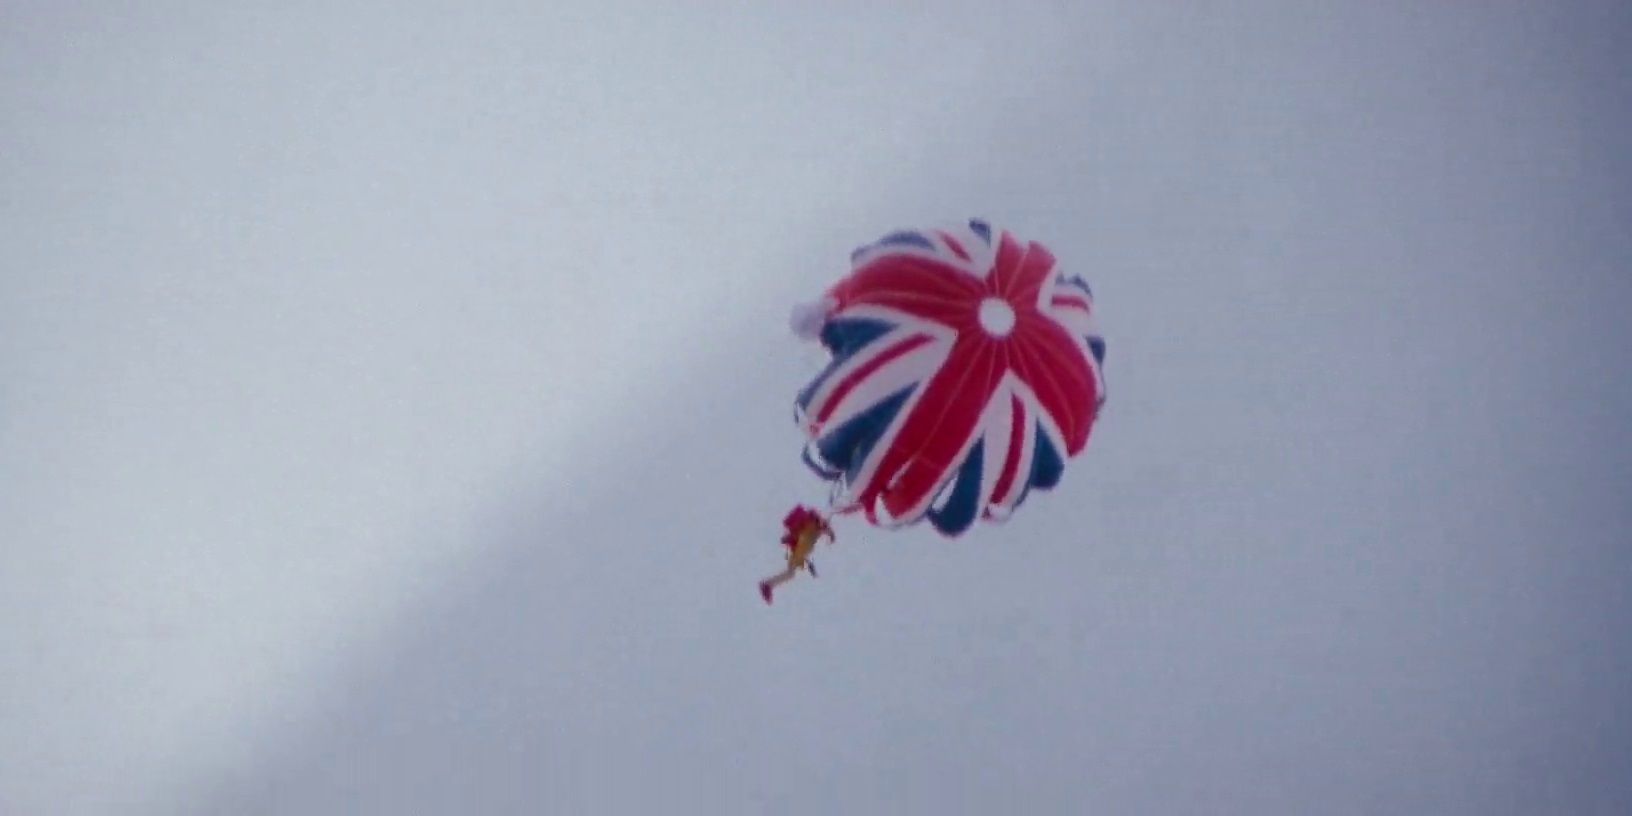 The opening parachute stunt from The Spy Who Loved Me.